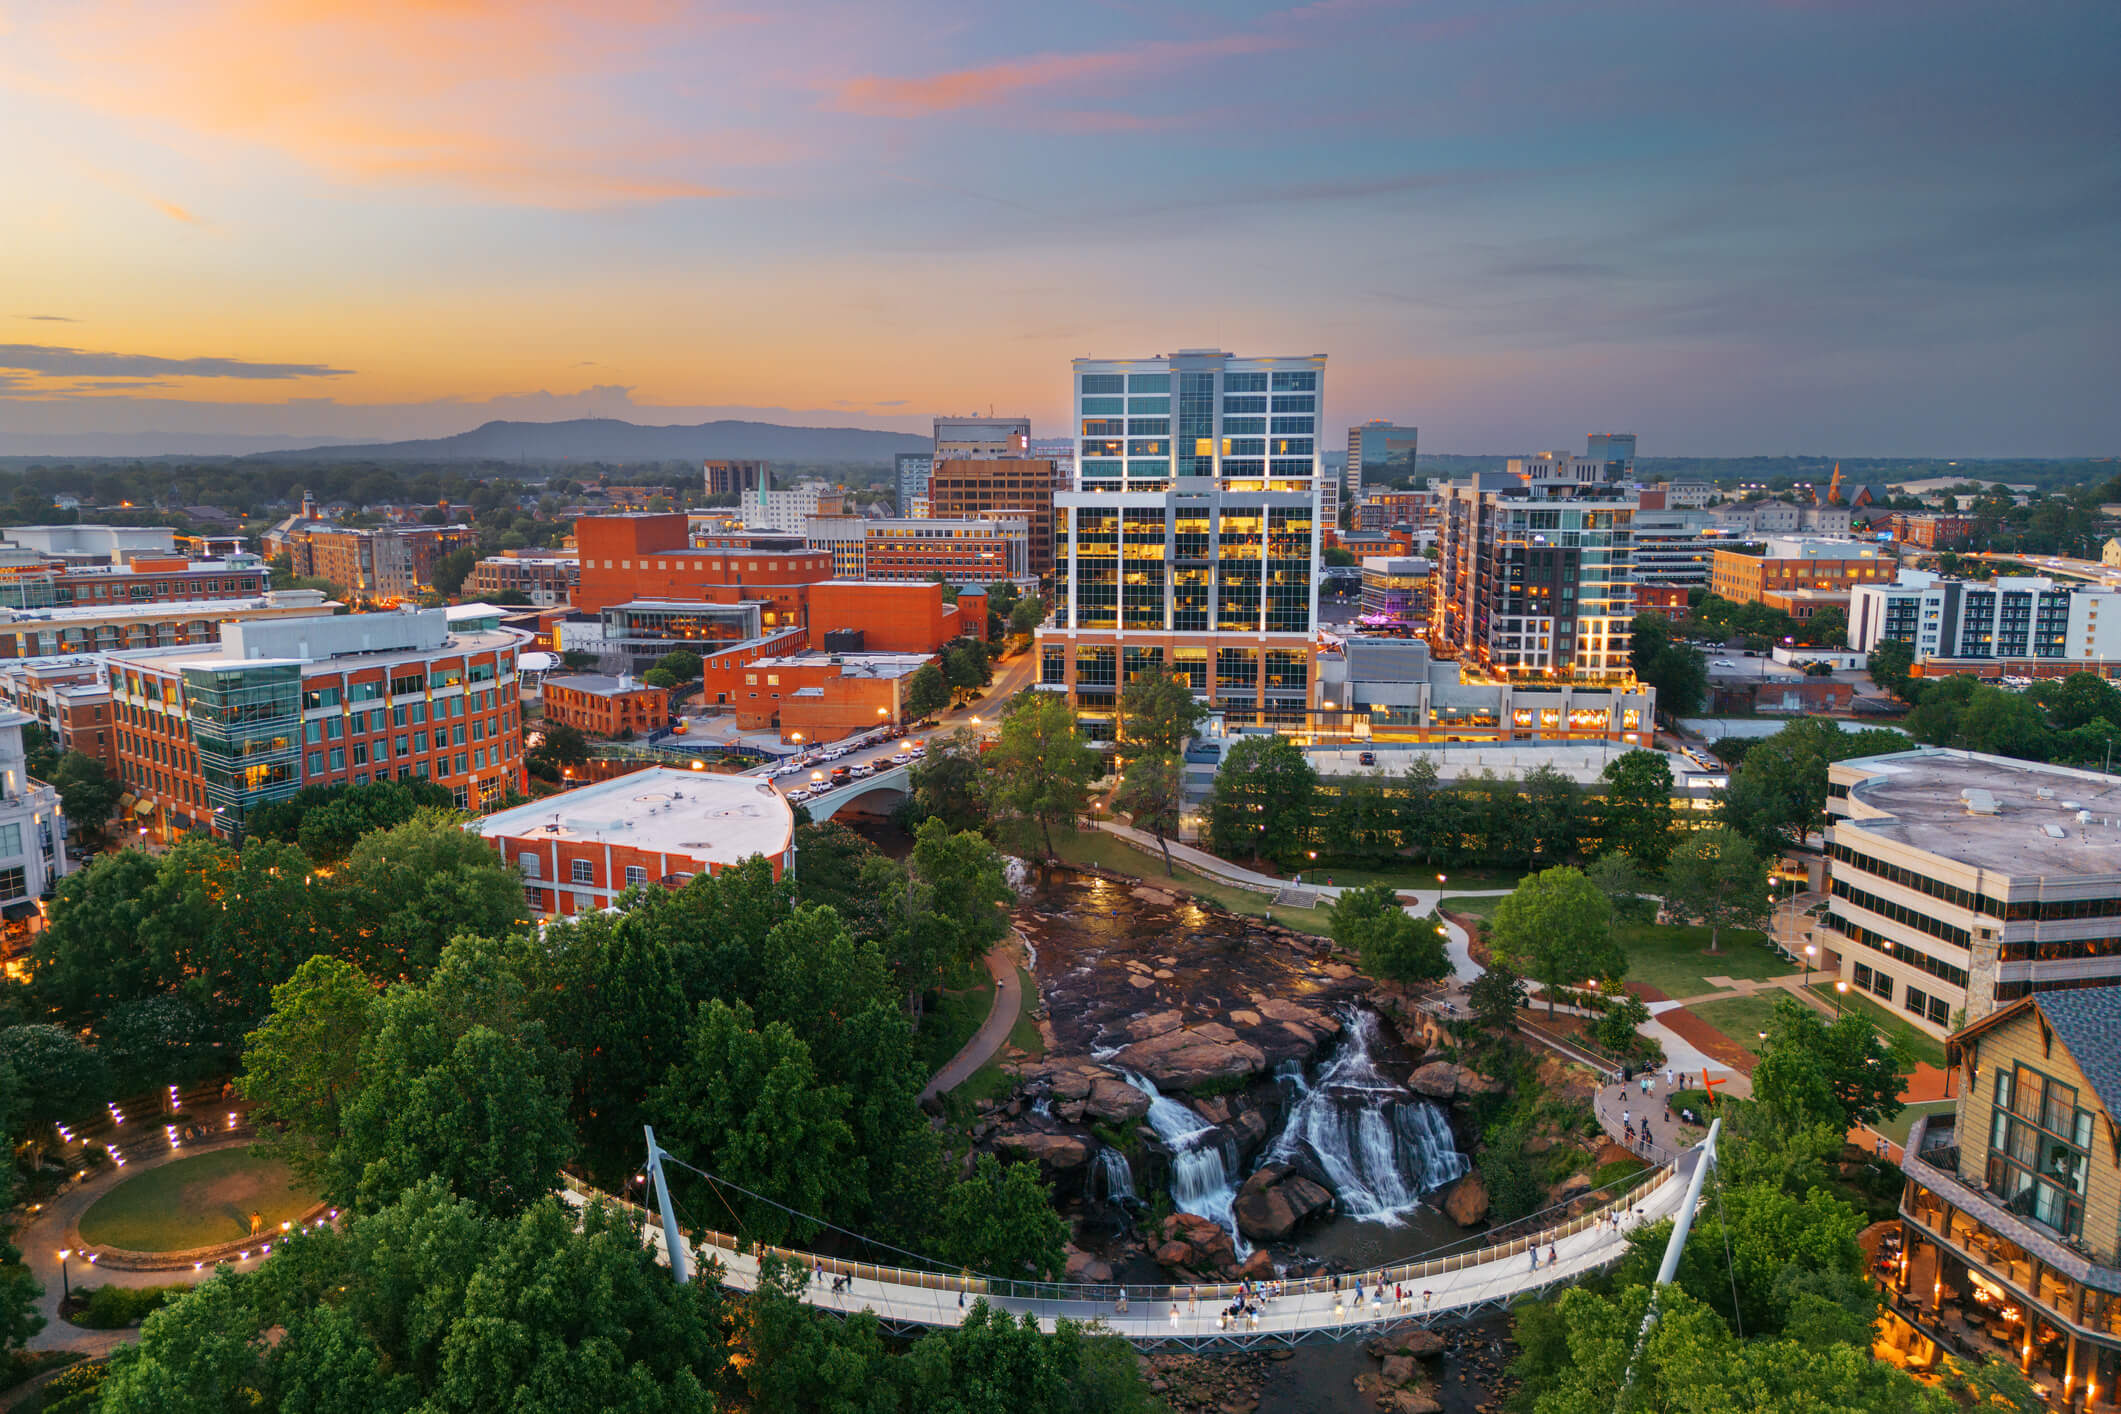 Lumos to invest nearly $100M in Greenville County with a 100% fiber optic internet network expansion.